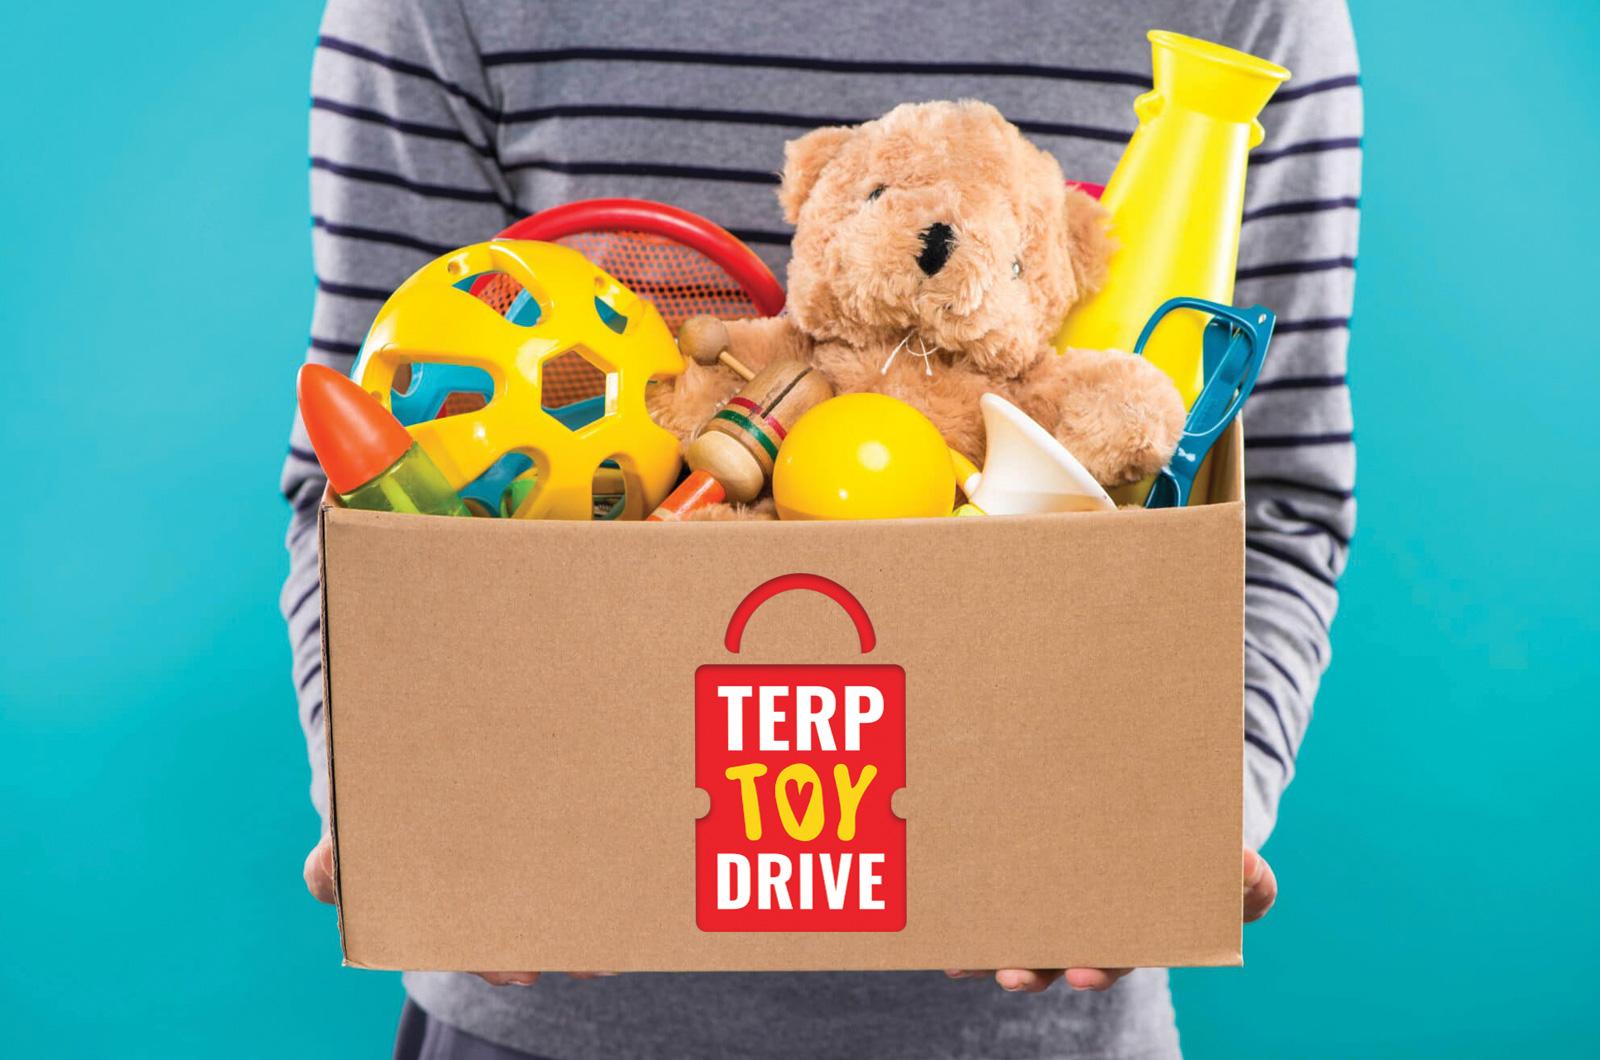 Terp Toy Drive - Toys in Box